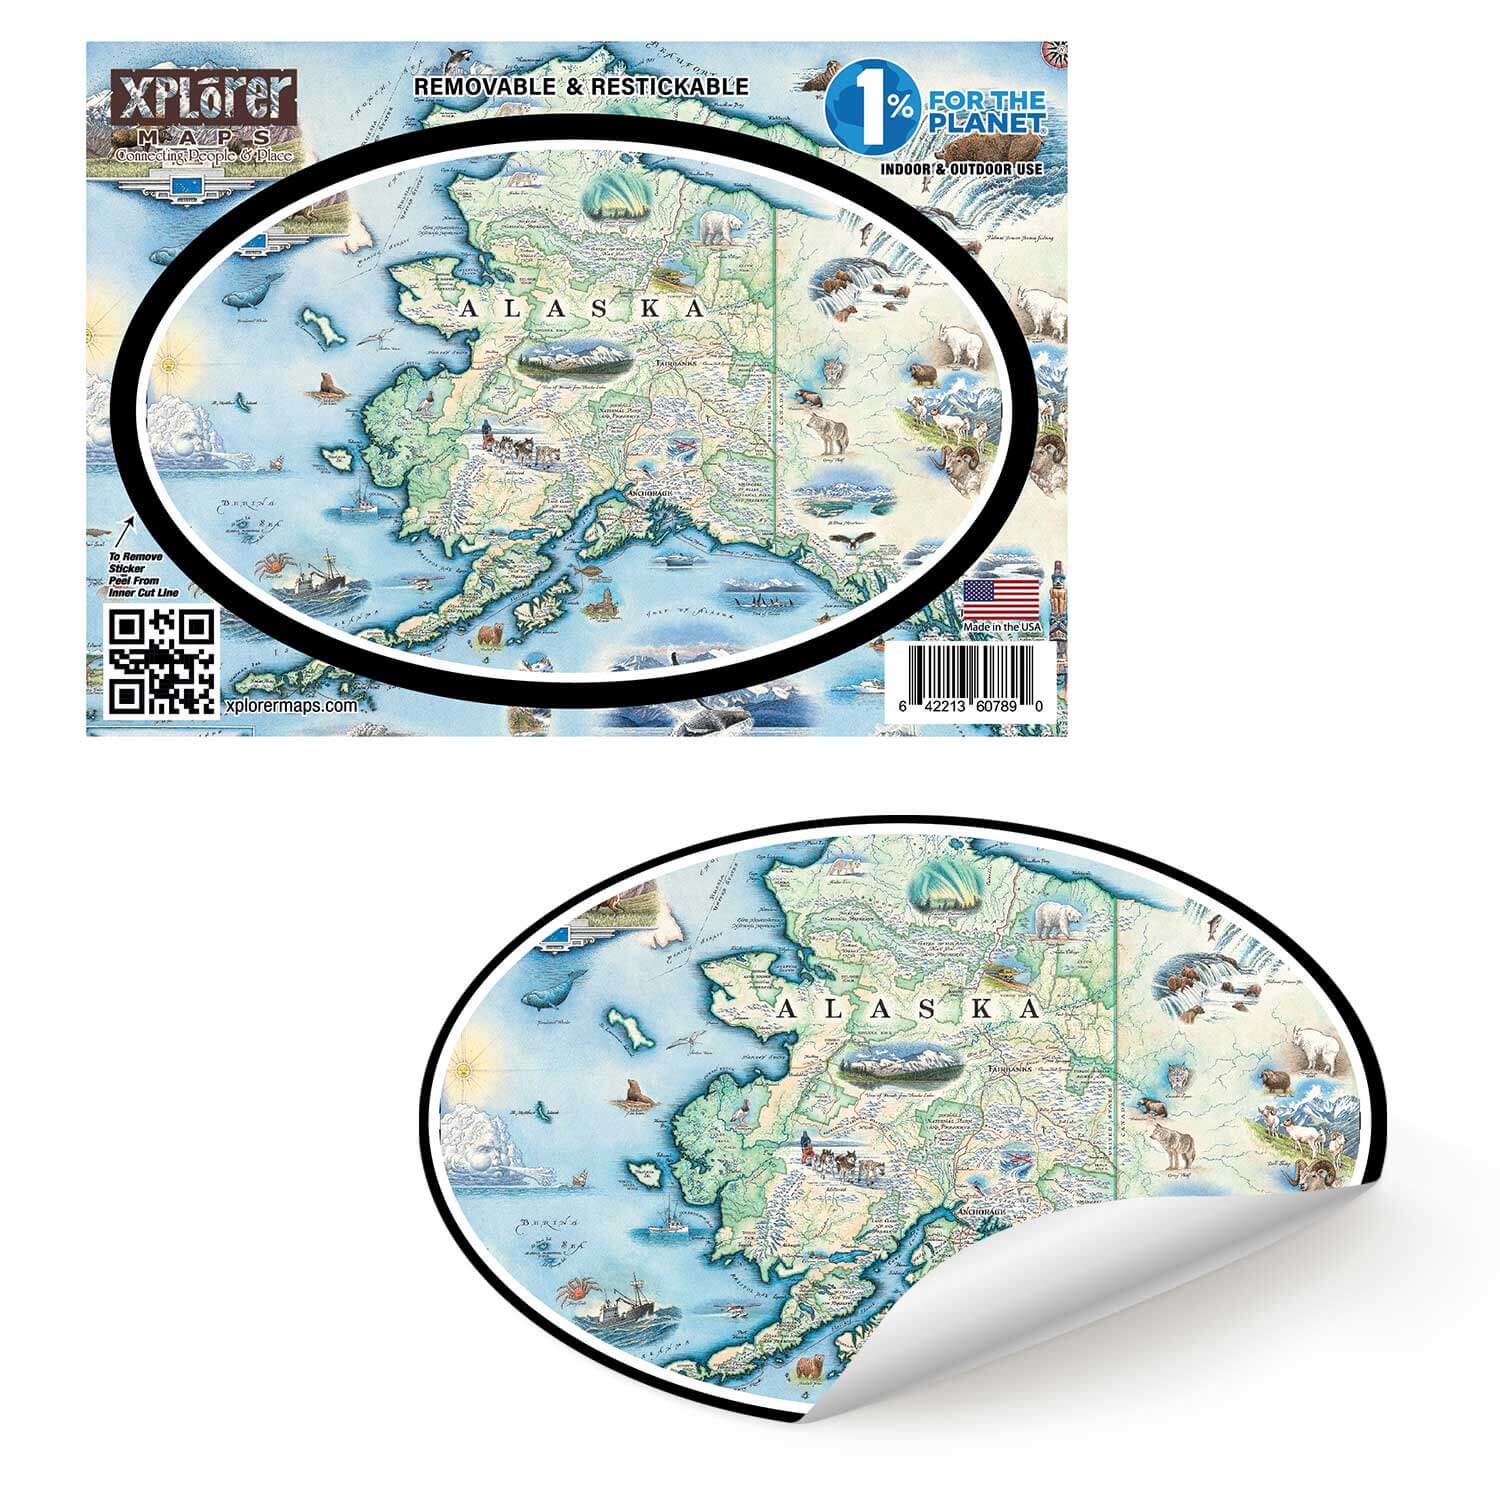 Alaska State Map Sticker in earth tone colors of blues and greens.The map includes Denali National Park and cities such as Anchorage, Fairbanks, and Juneau. Illustrations of wildlife matching the region: Polar bears, arctic foxes, moose, caribou, Gray wolves, Dall Sheep, wolverines, Canadian Lynx, King Salmon, Halibut, King Crab, horned puffins, harbor seals, Arctic Tern, ptarmigan, walruses, Kodiak bears, musk ox, Bald Eagles, Mountain Goats and more. 